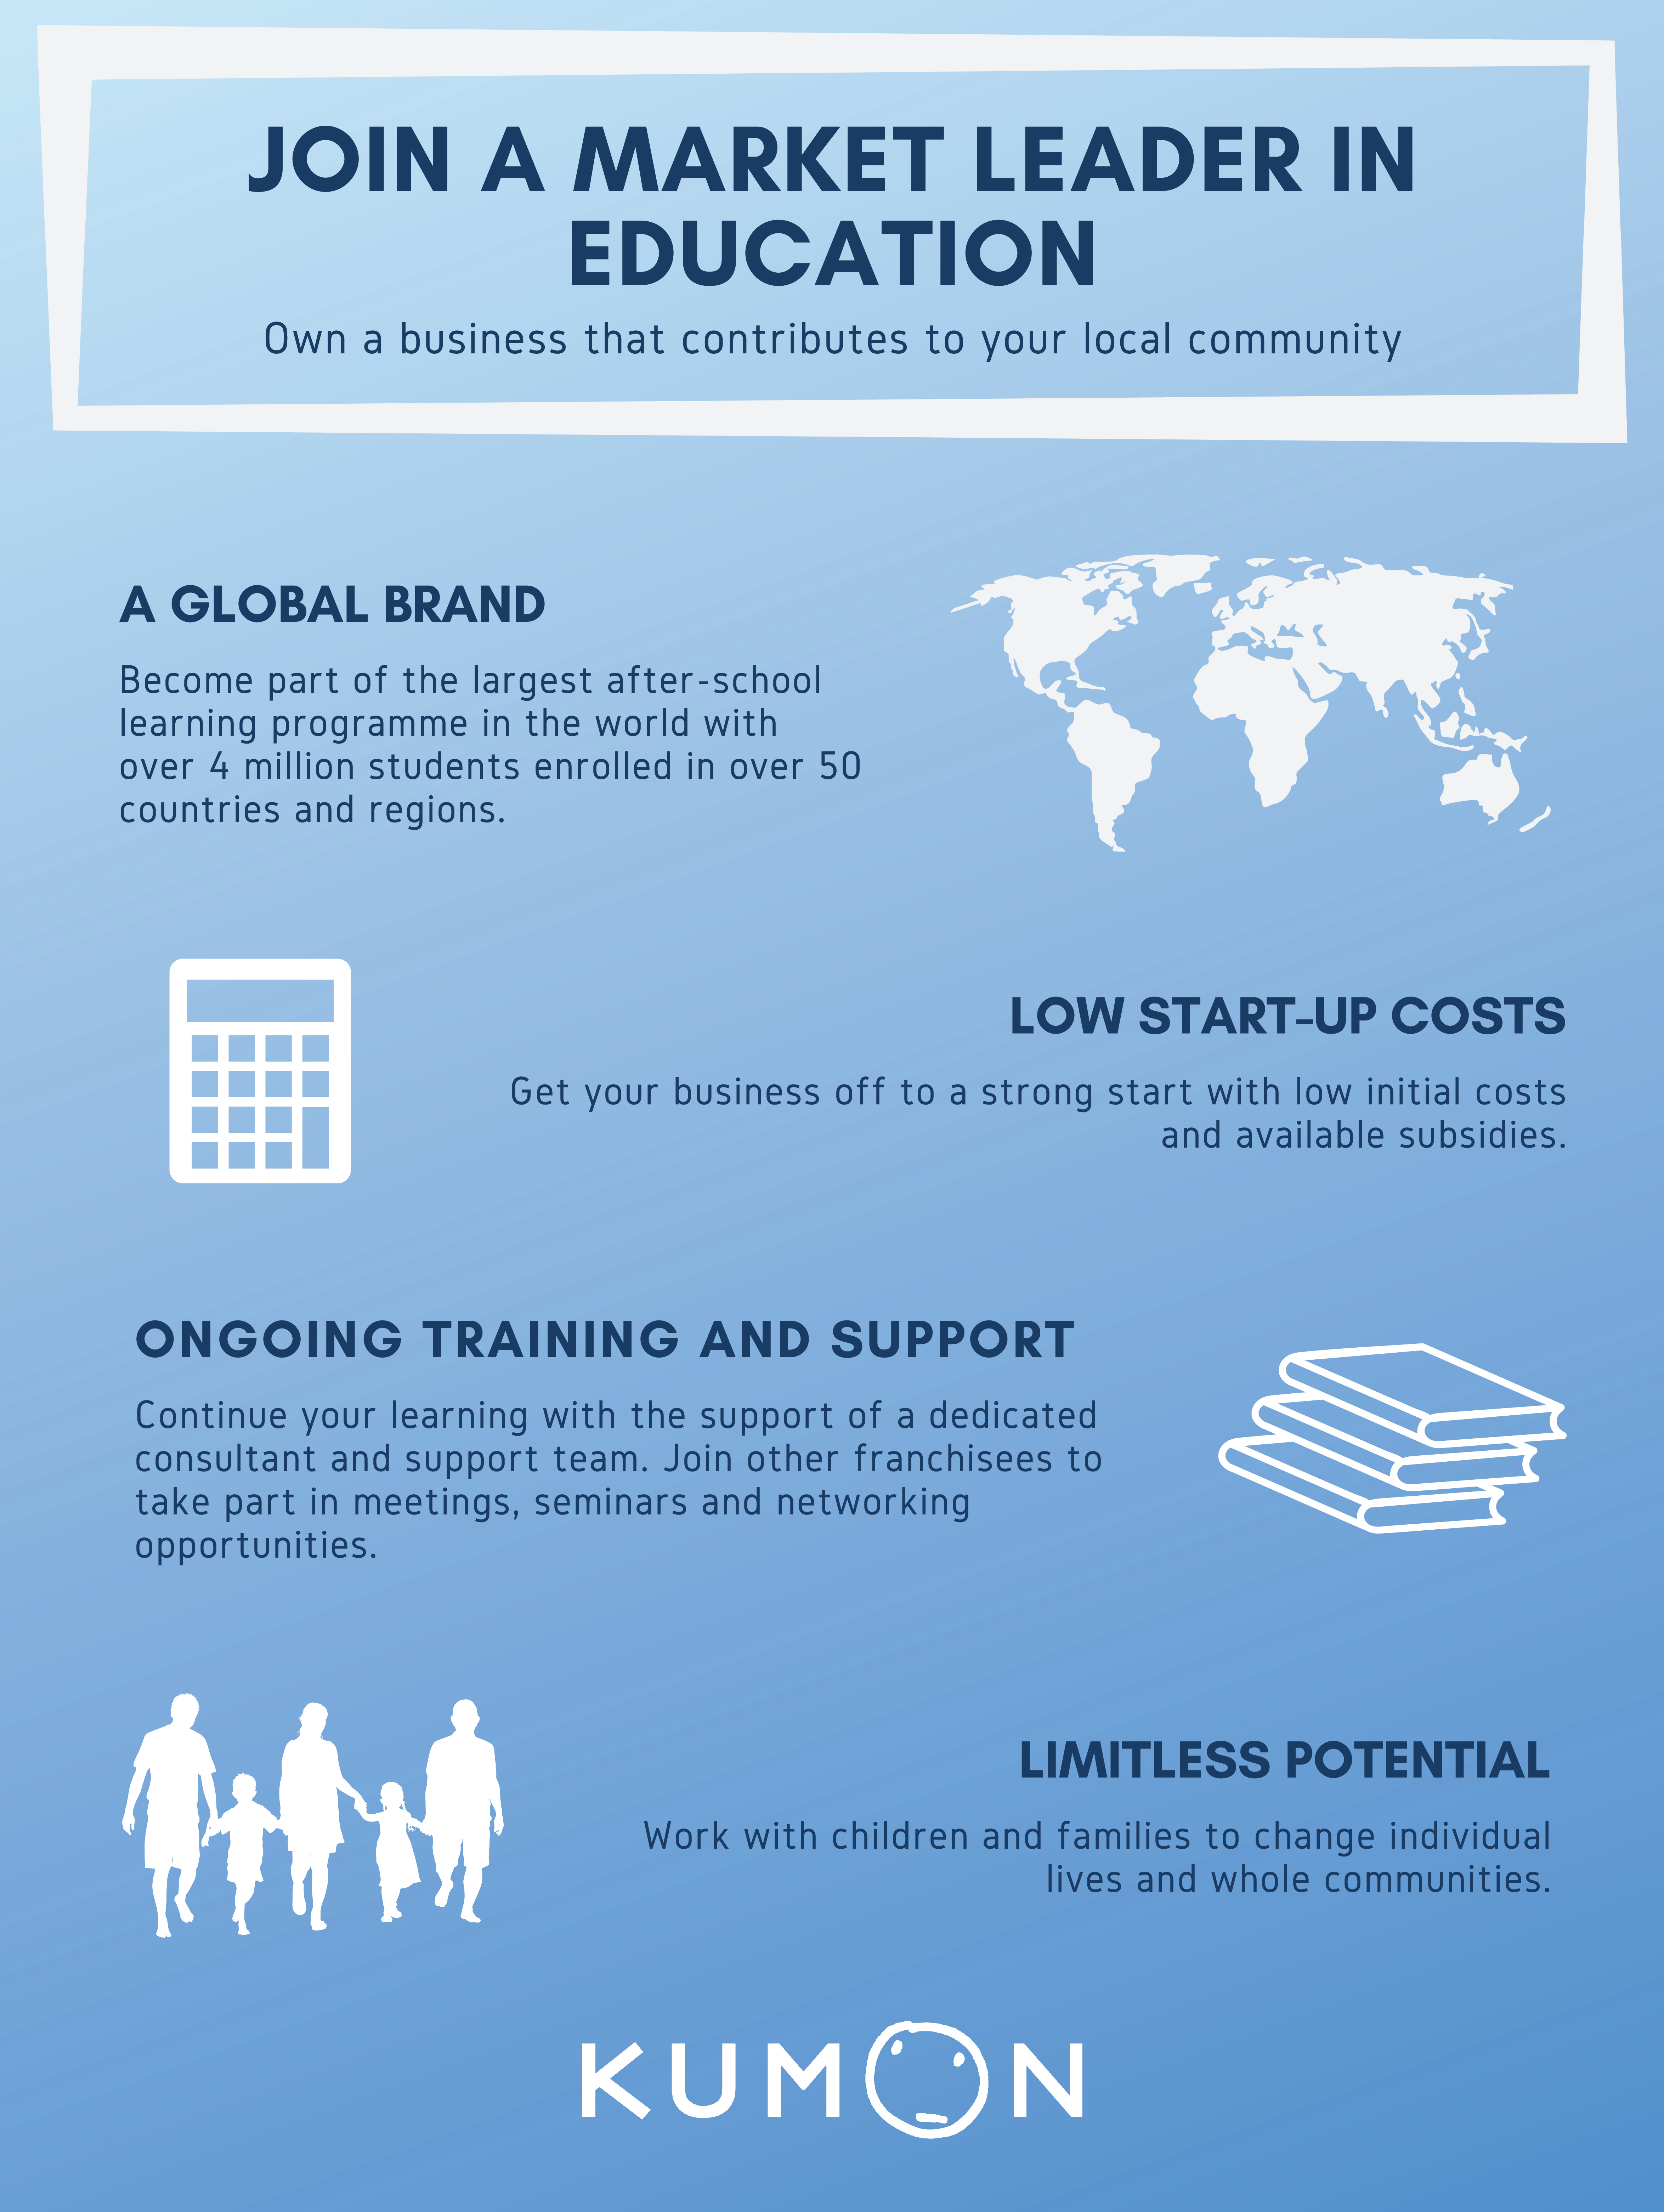  Join-a-market-leader-in-education-infographic